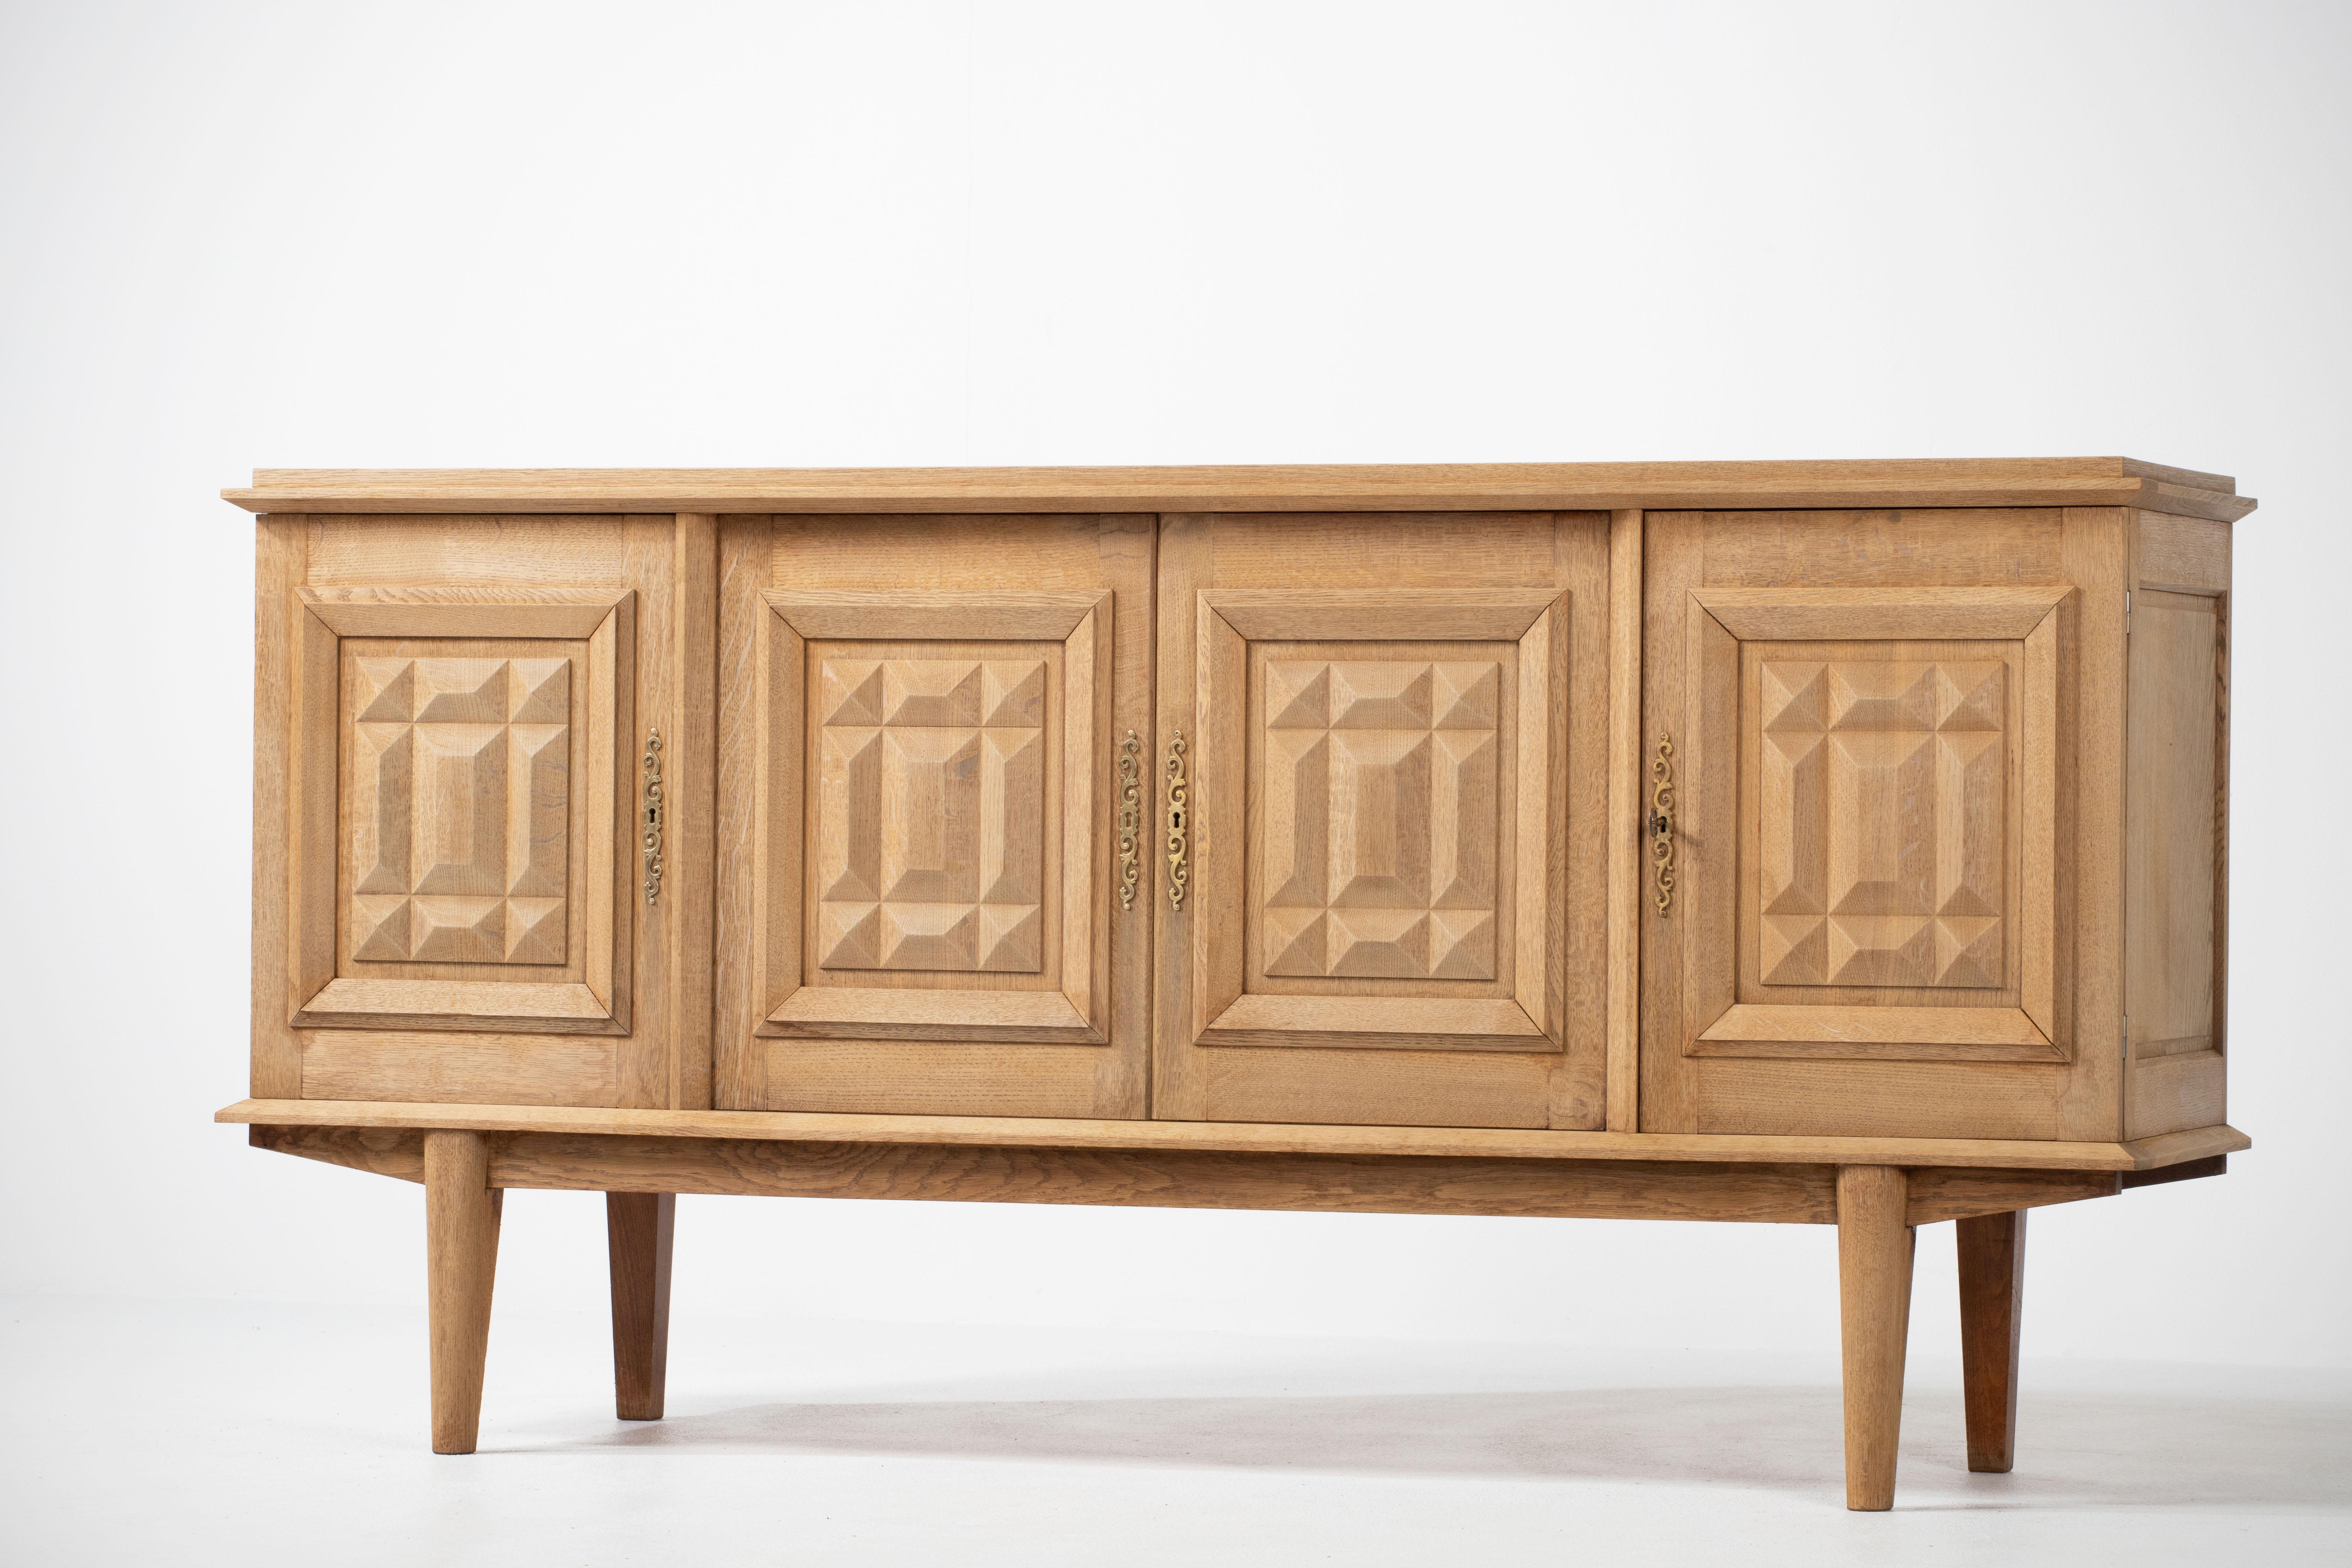 Art Deco Bleached Solid Oak Credenza with Graphic Details, France, 1940s For Sale